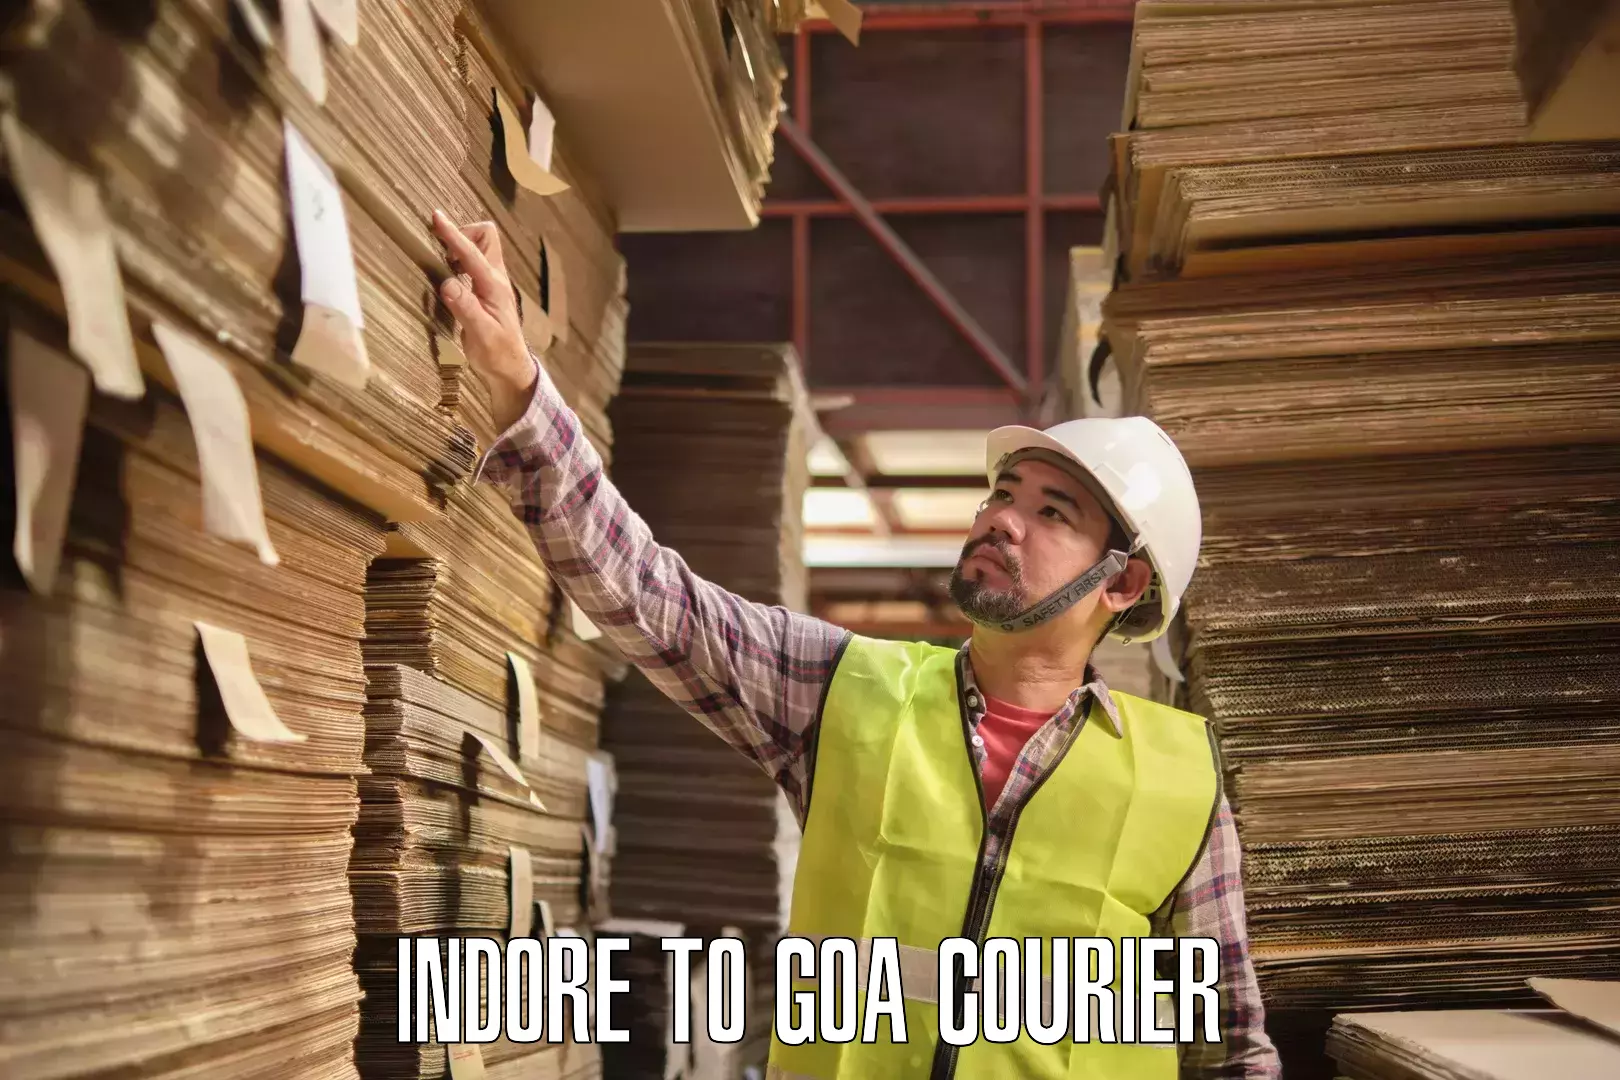 High-capacity parcel service Indore to Goa